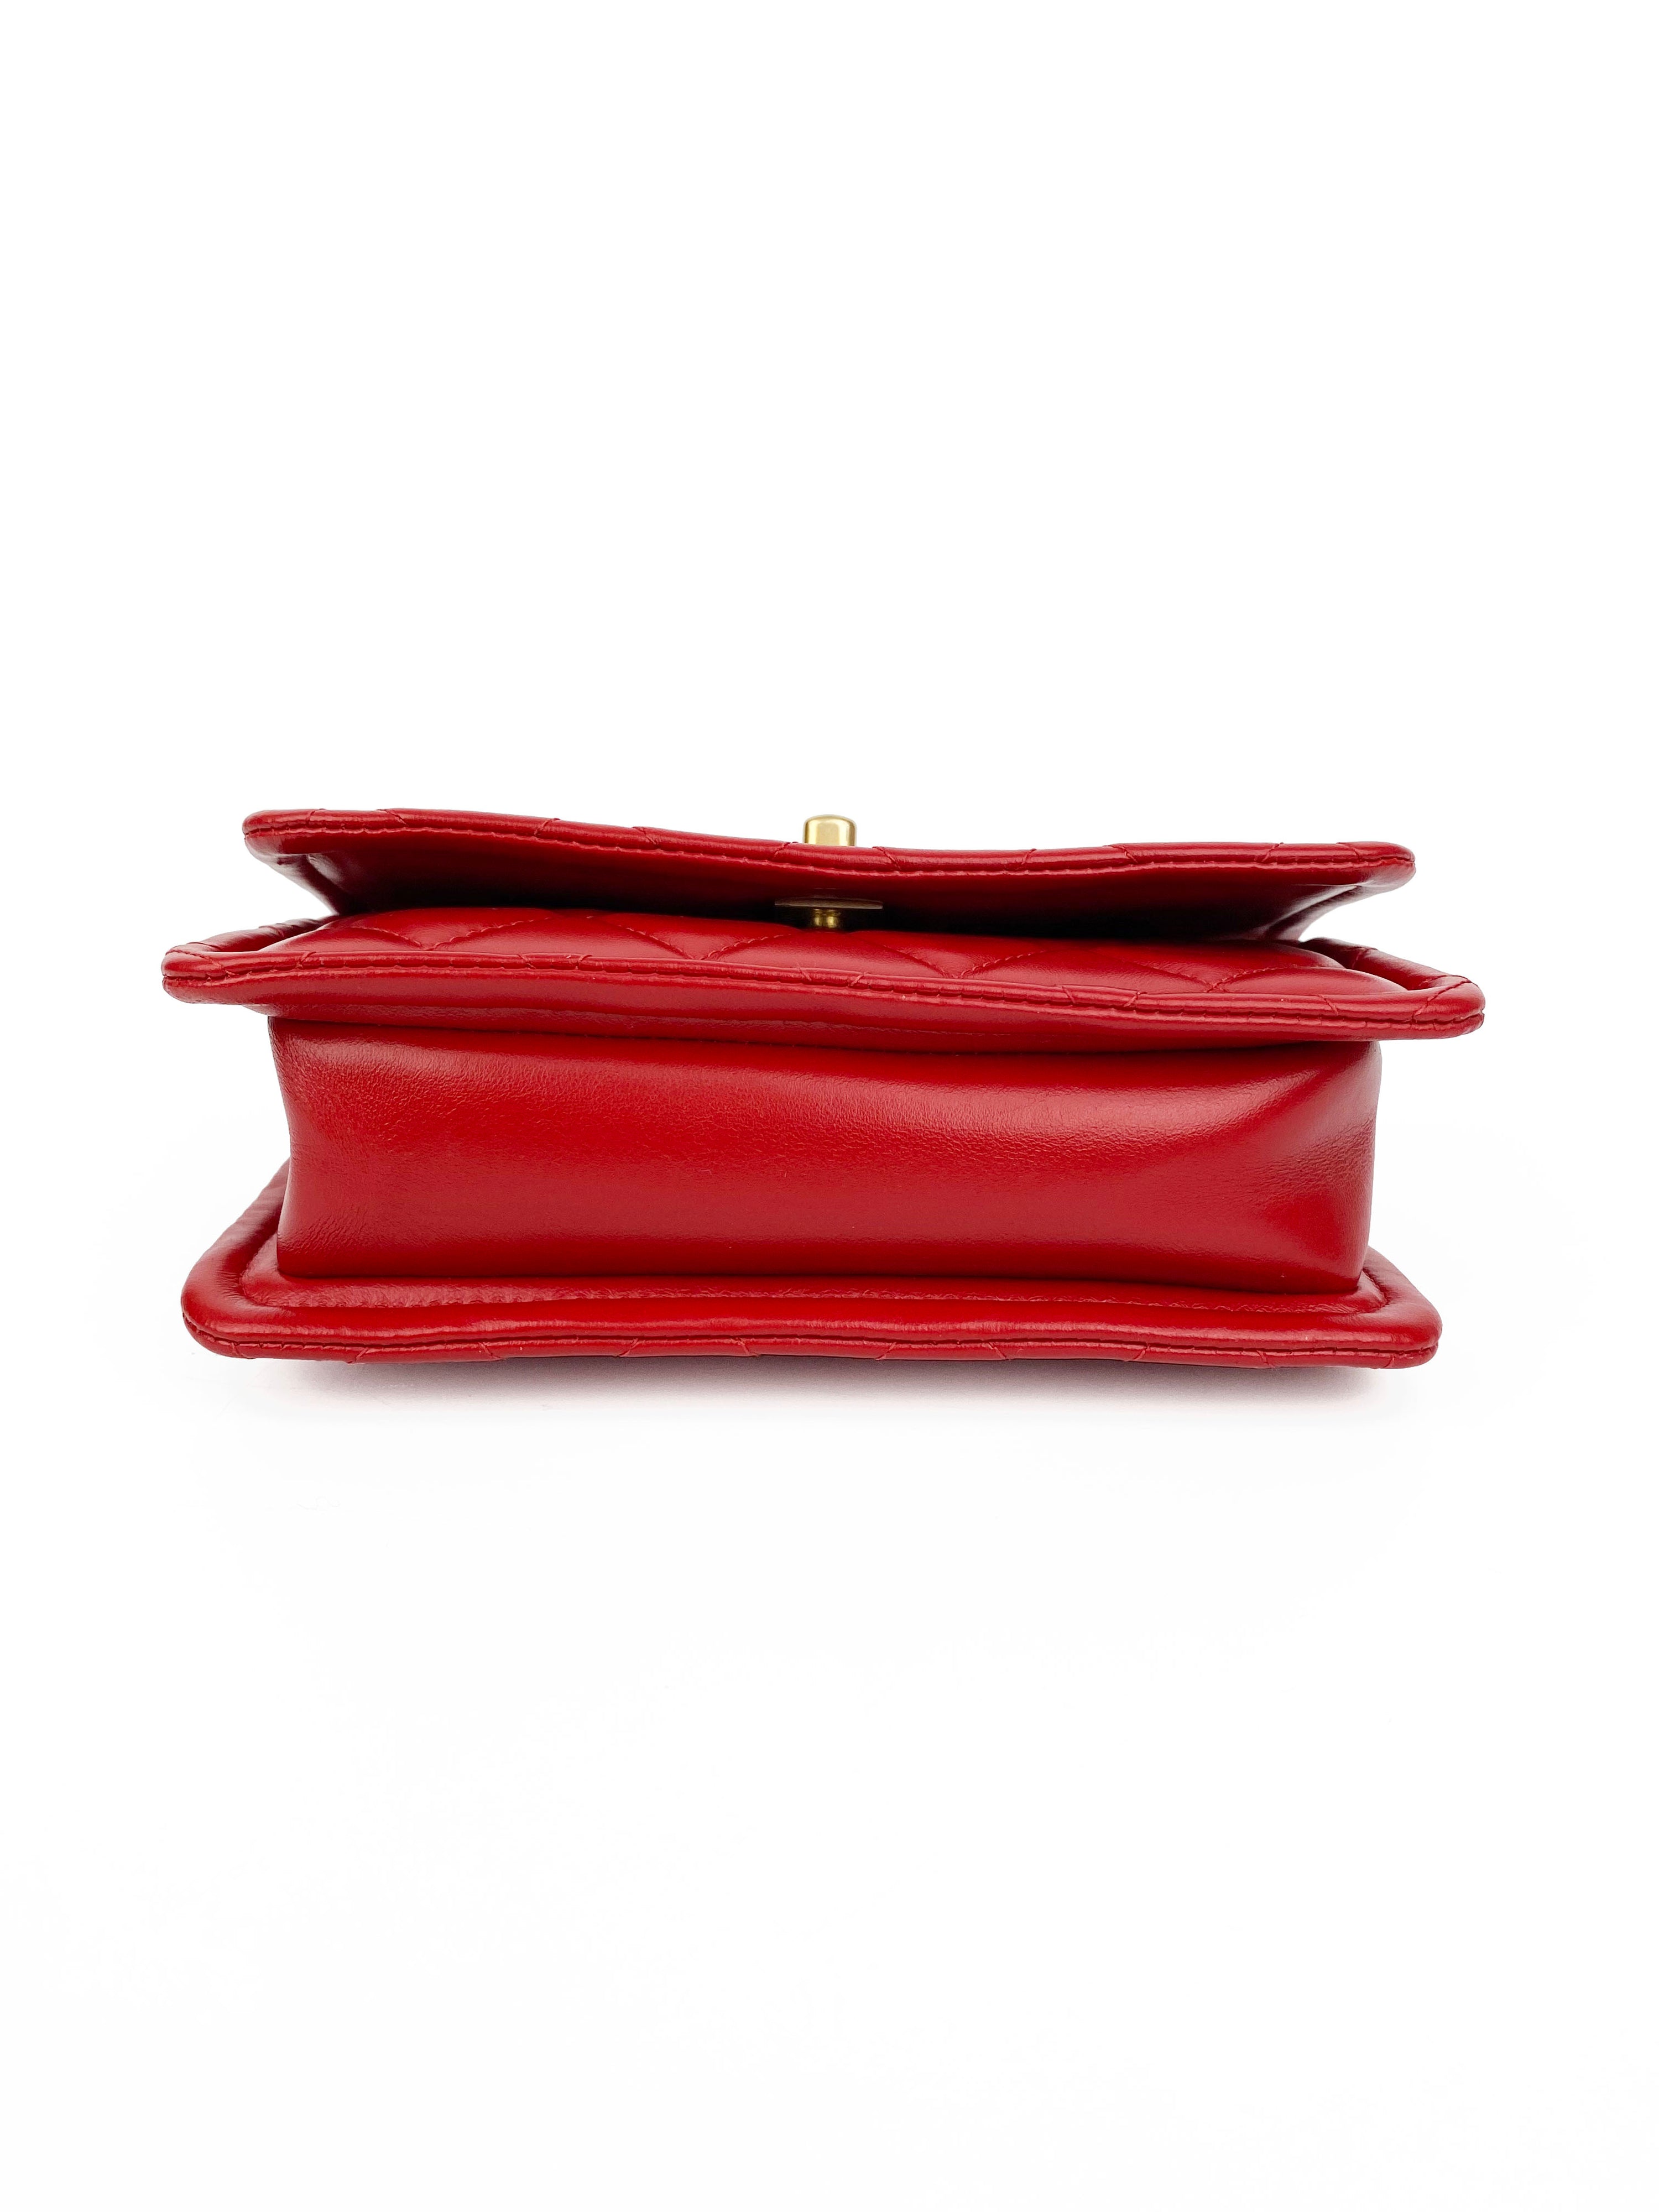 Chanel Small Red Flap Bag